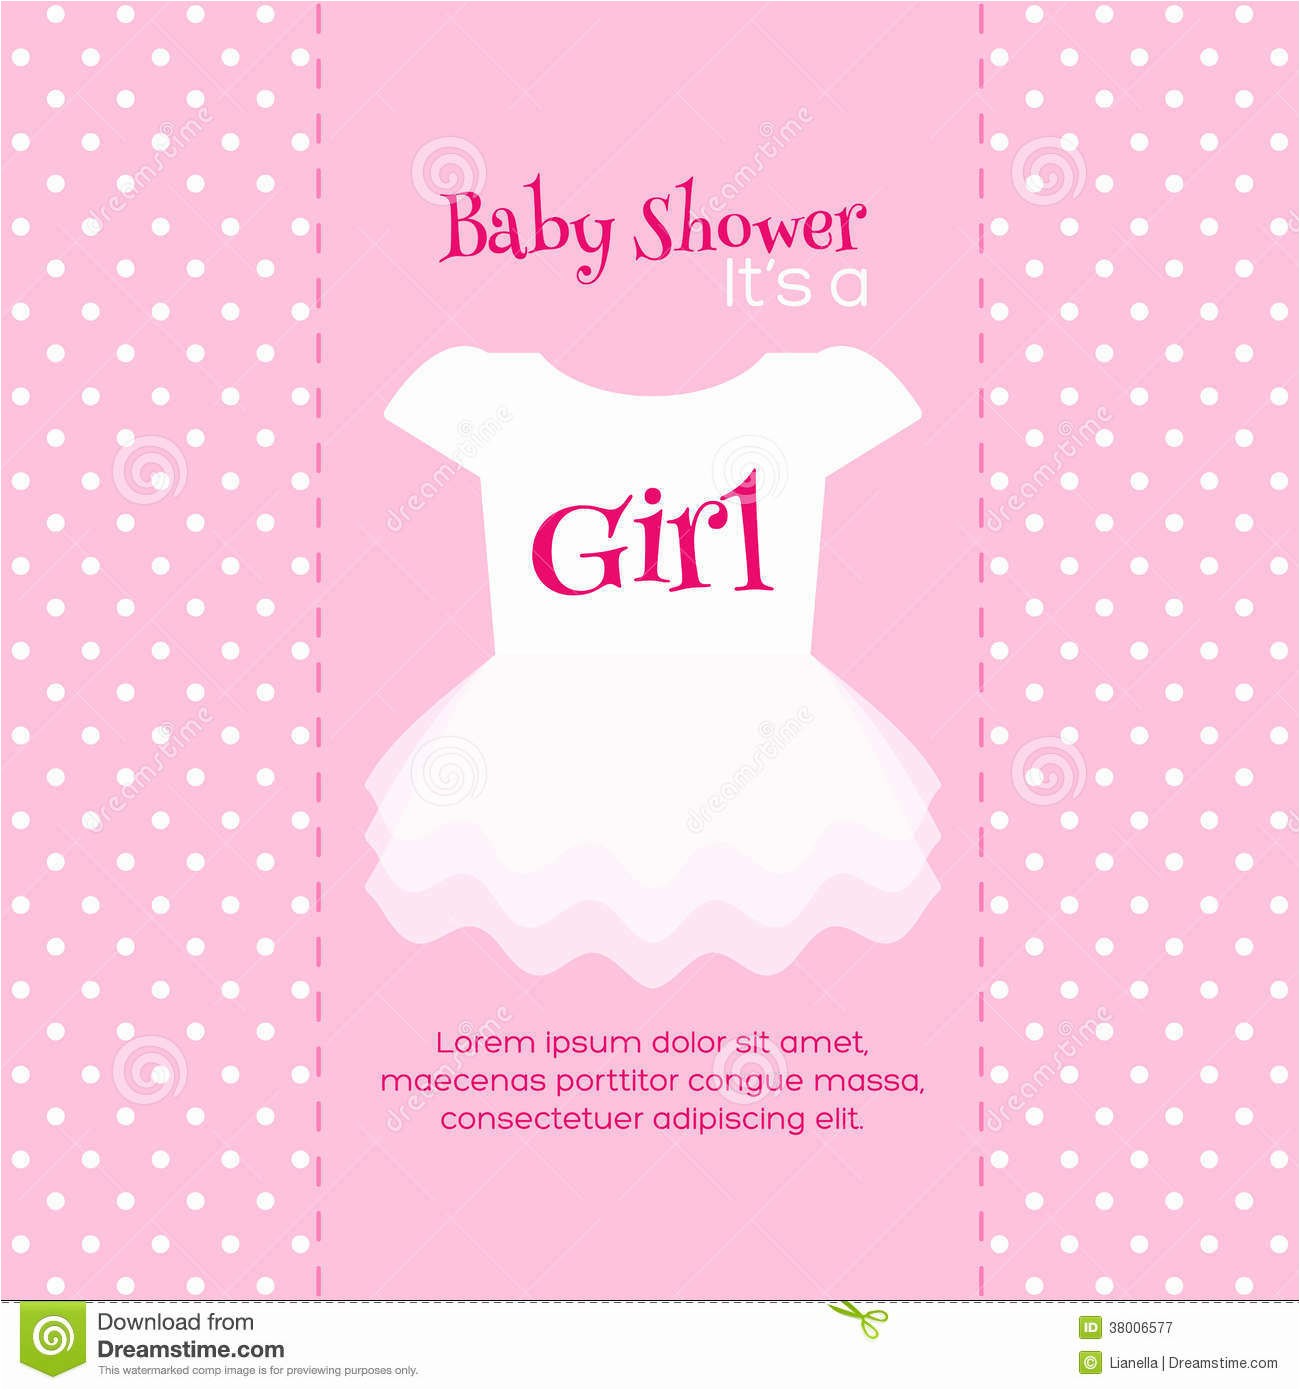 ladies only baby shower invitation wording